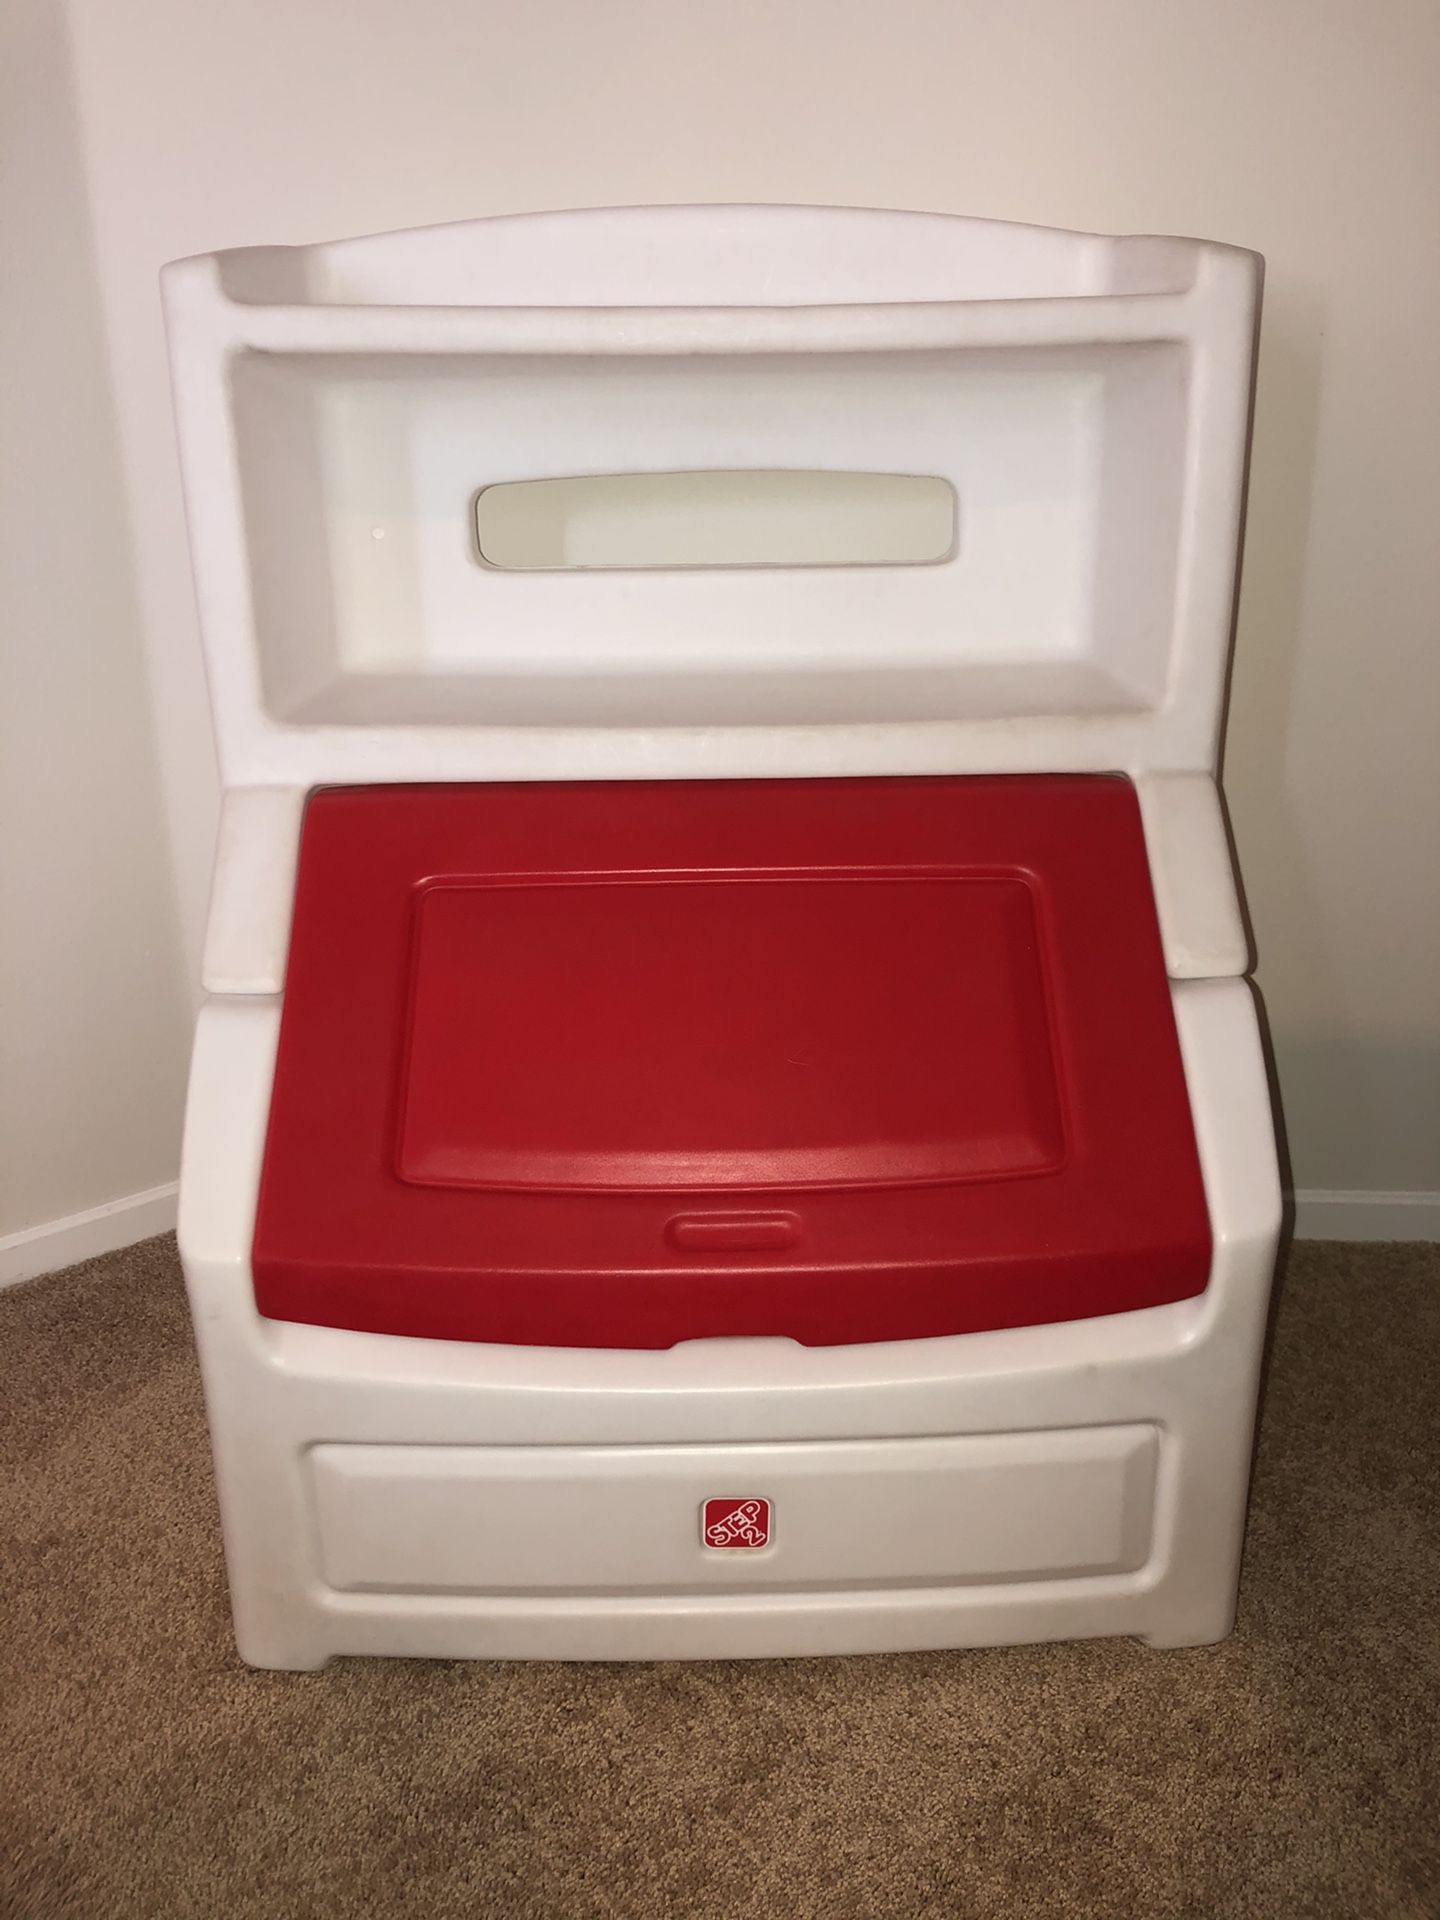 Gently Used Toy Box. Red & White Step2 Lift & Hide 38" Bookcase with Kids Storage Bin and Toy Organizer. 38"H x 28.5"W x 21"D. Holds books up to 10"